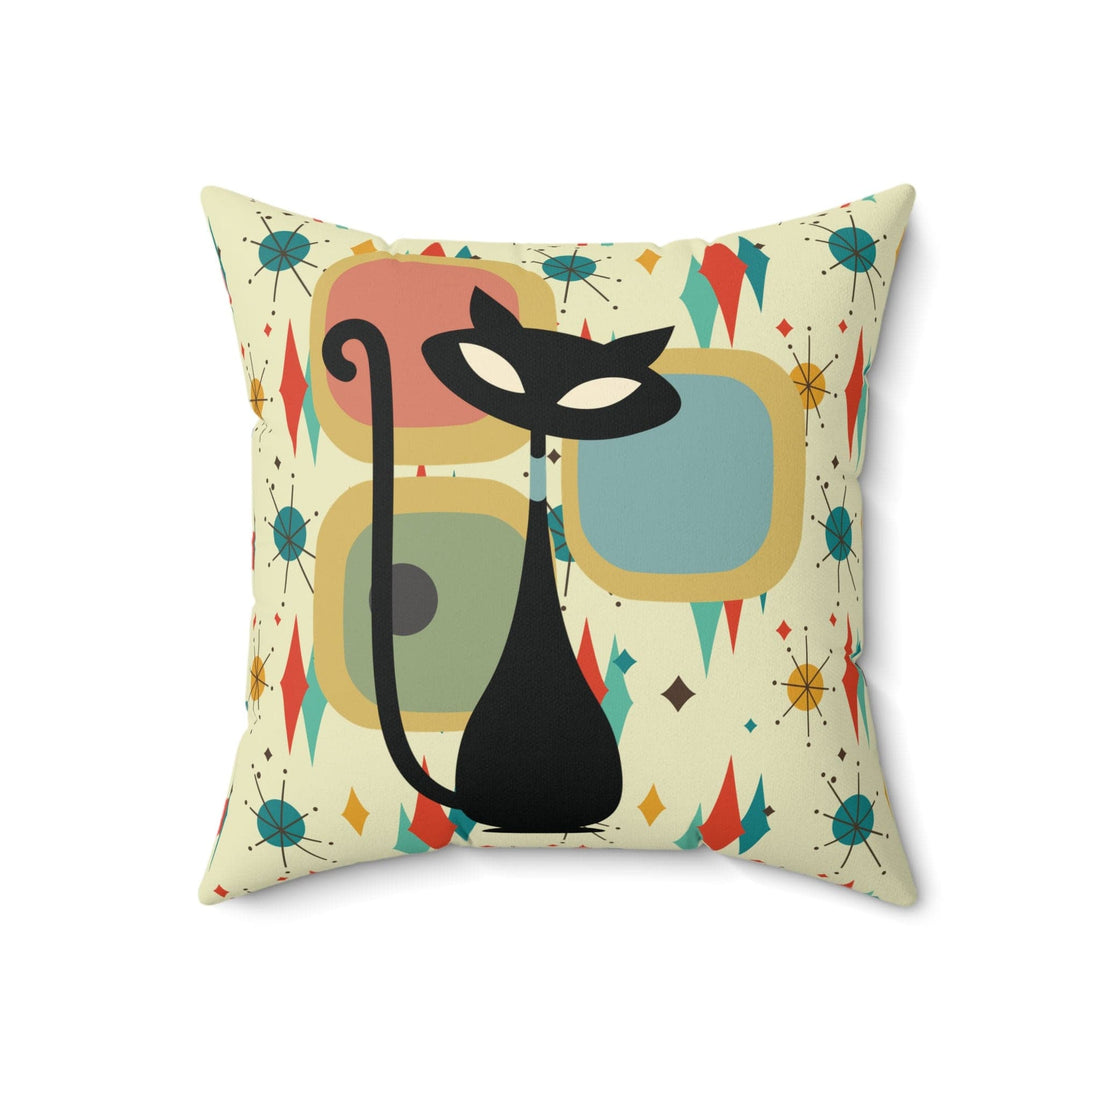 Kate McEnroe New York Groovy Mid Century Modern Atomic Cat Throw Pillow with Insert, Franciscan Diamond Starburst Retro Accent PillowsThrow Pillows22621666890820722728